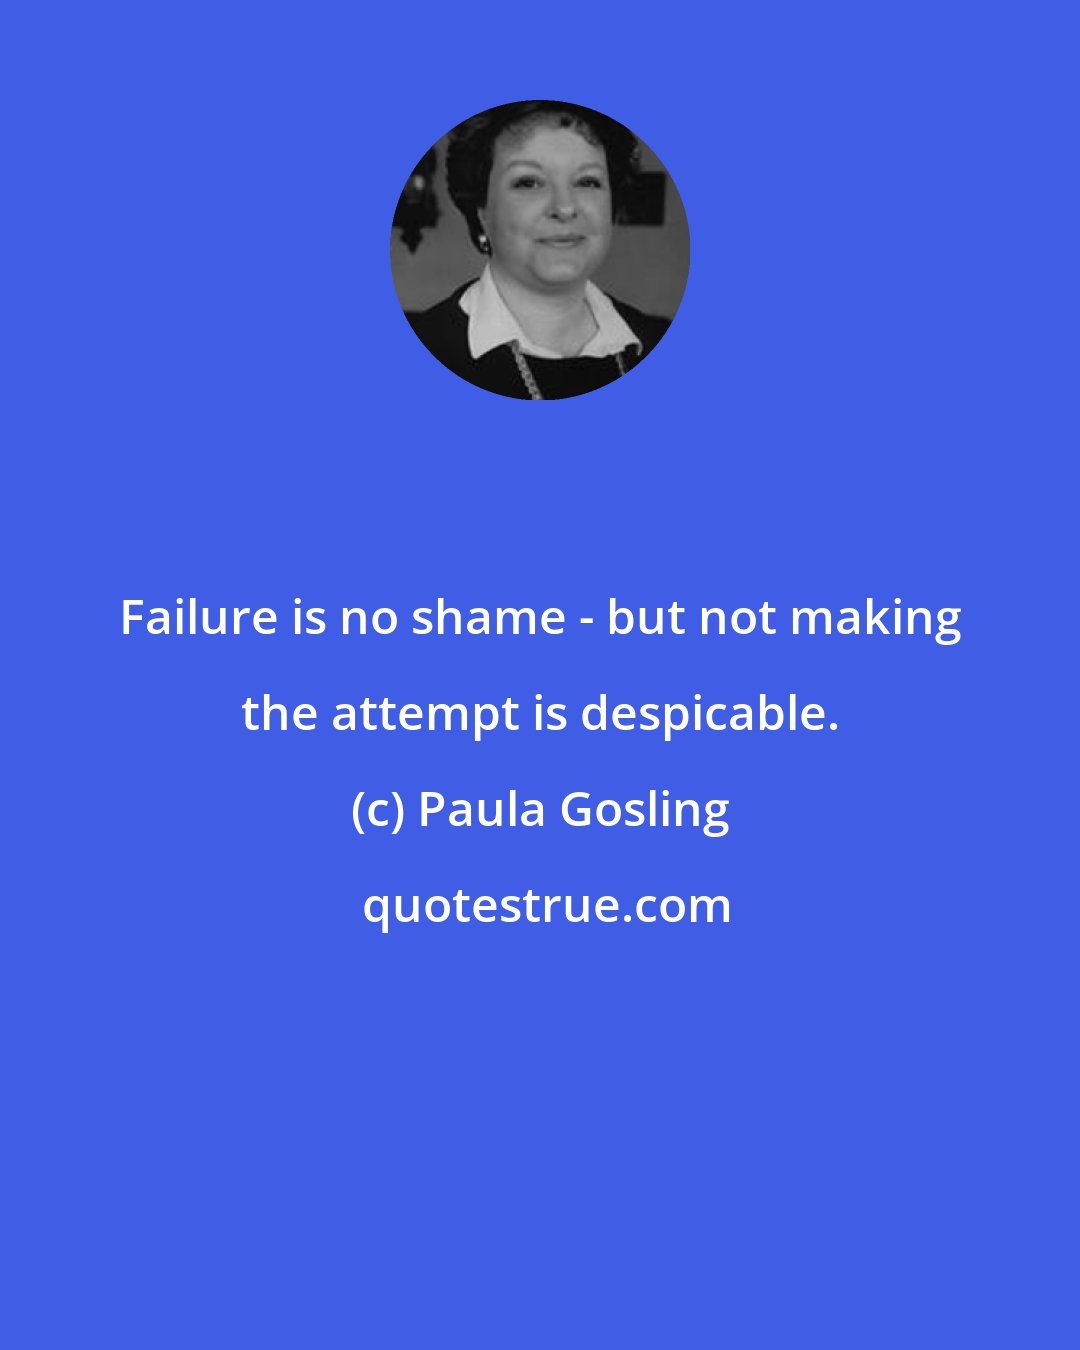 Paula Gosling: Failure is no shame - but not making the attempt is despicable.